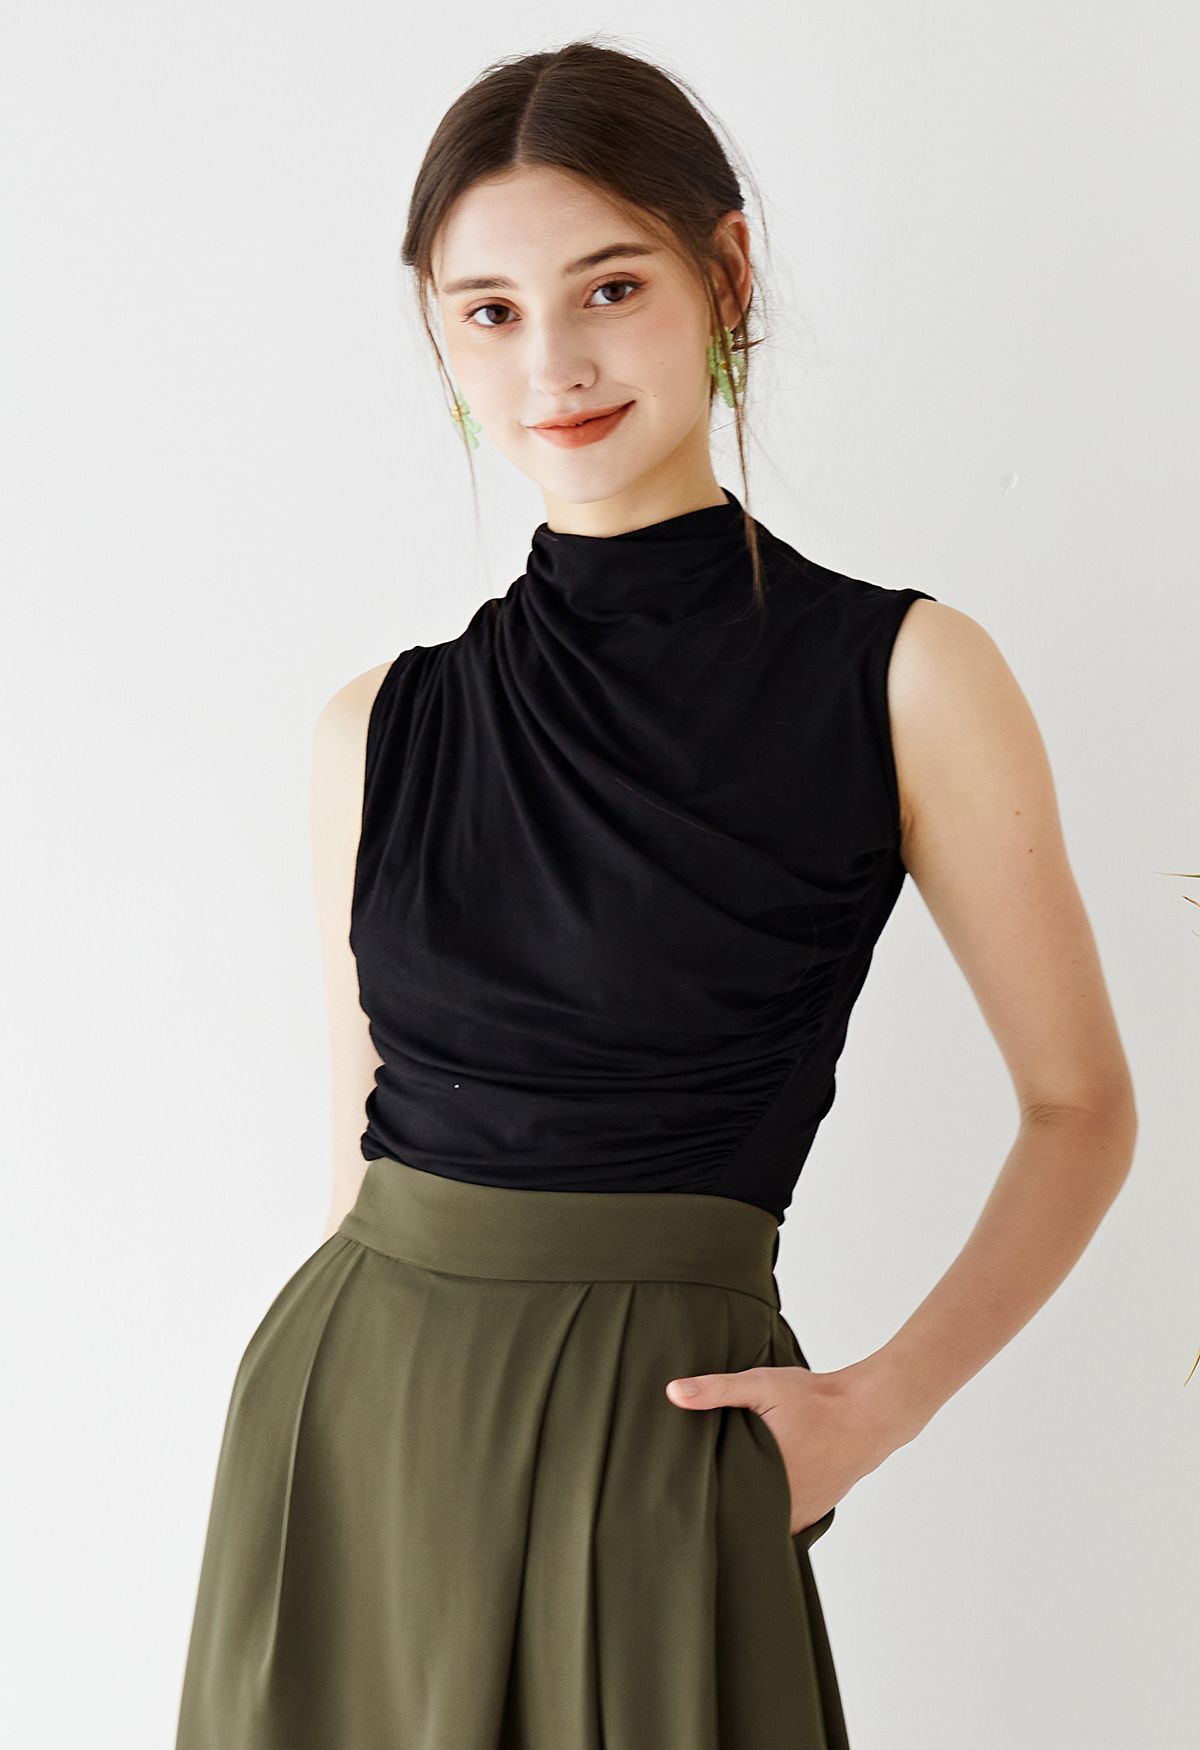 Ruched Detail Sleeveless Top in Black